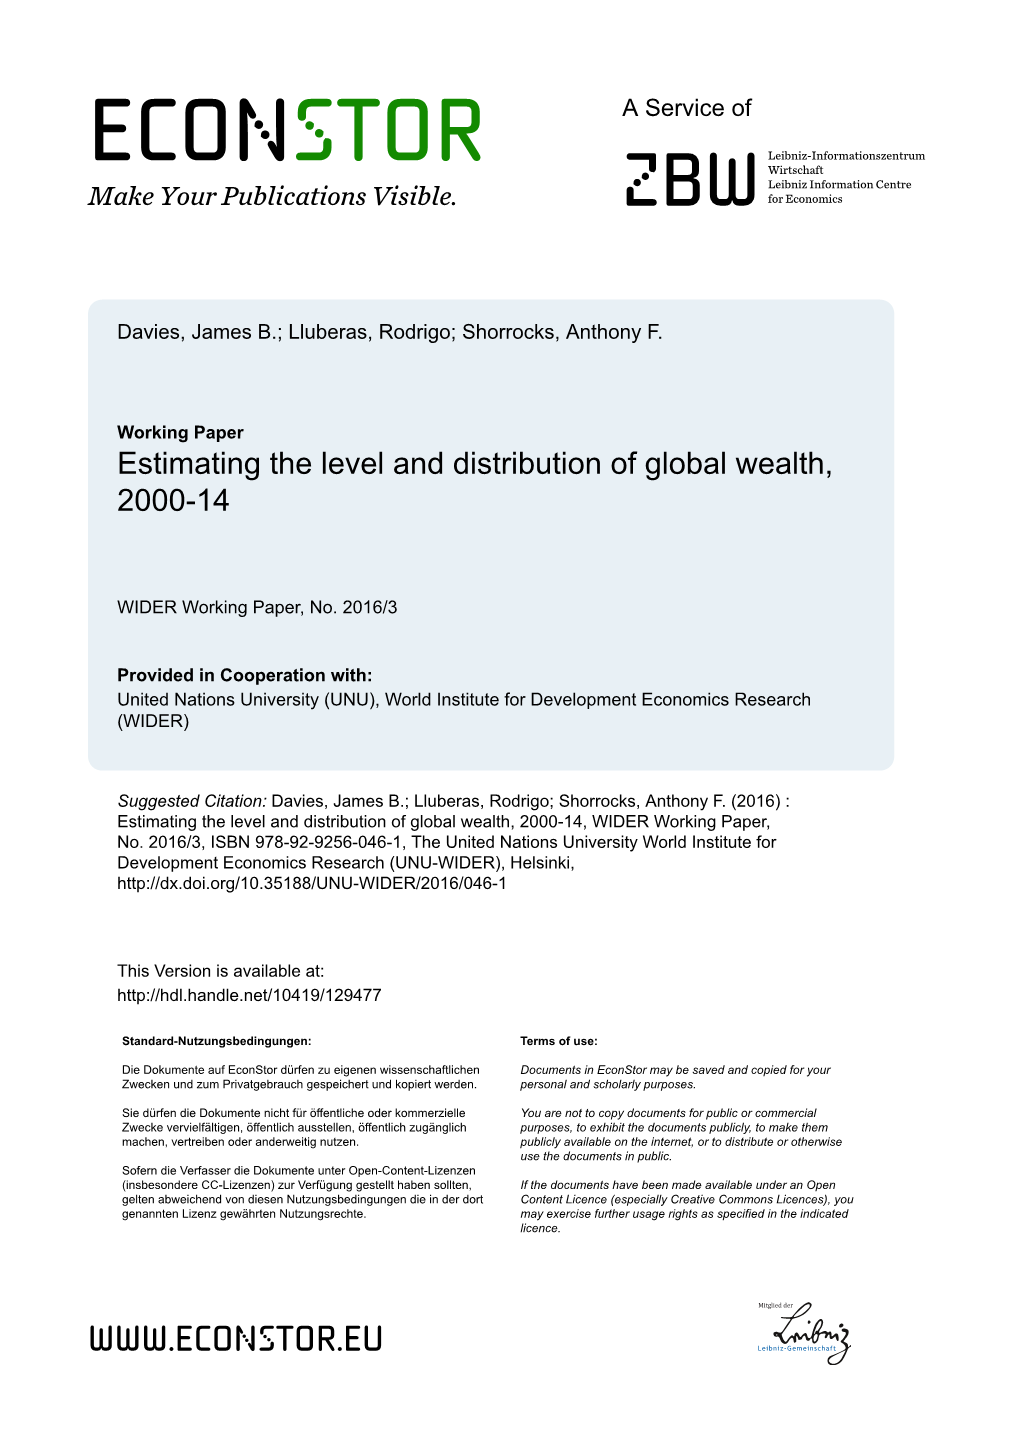 WIDER Working Paper 2016/3 Estimating the Level and Distribution